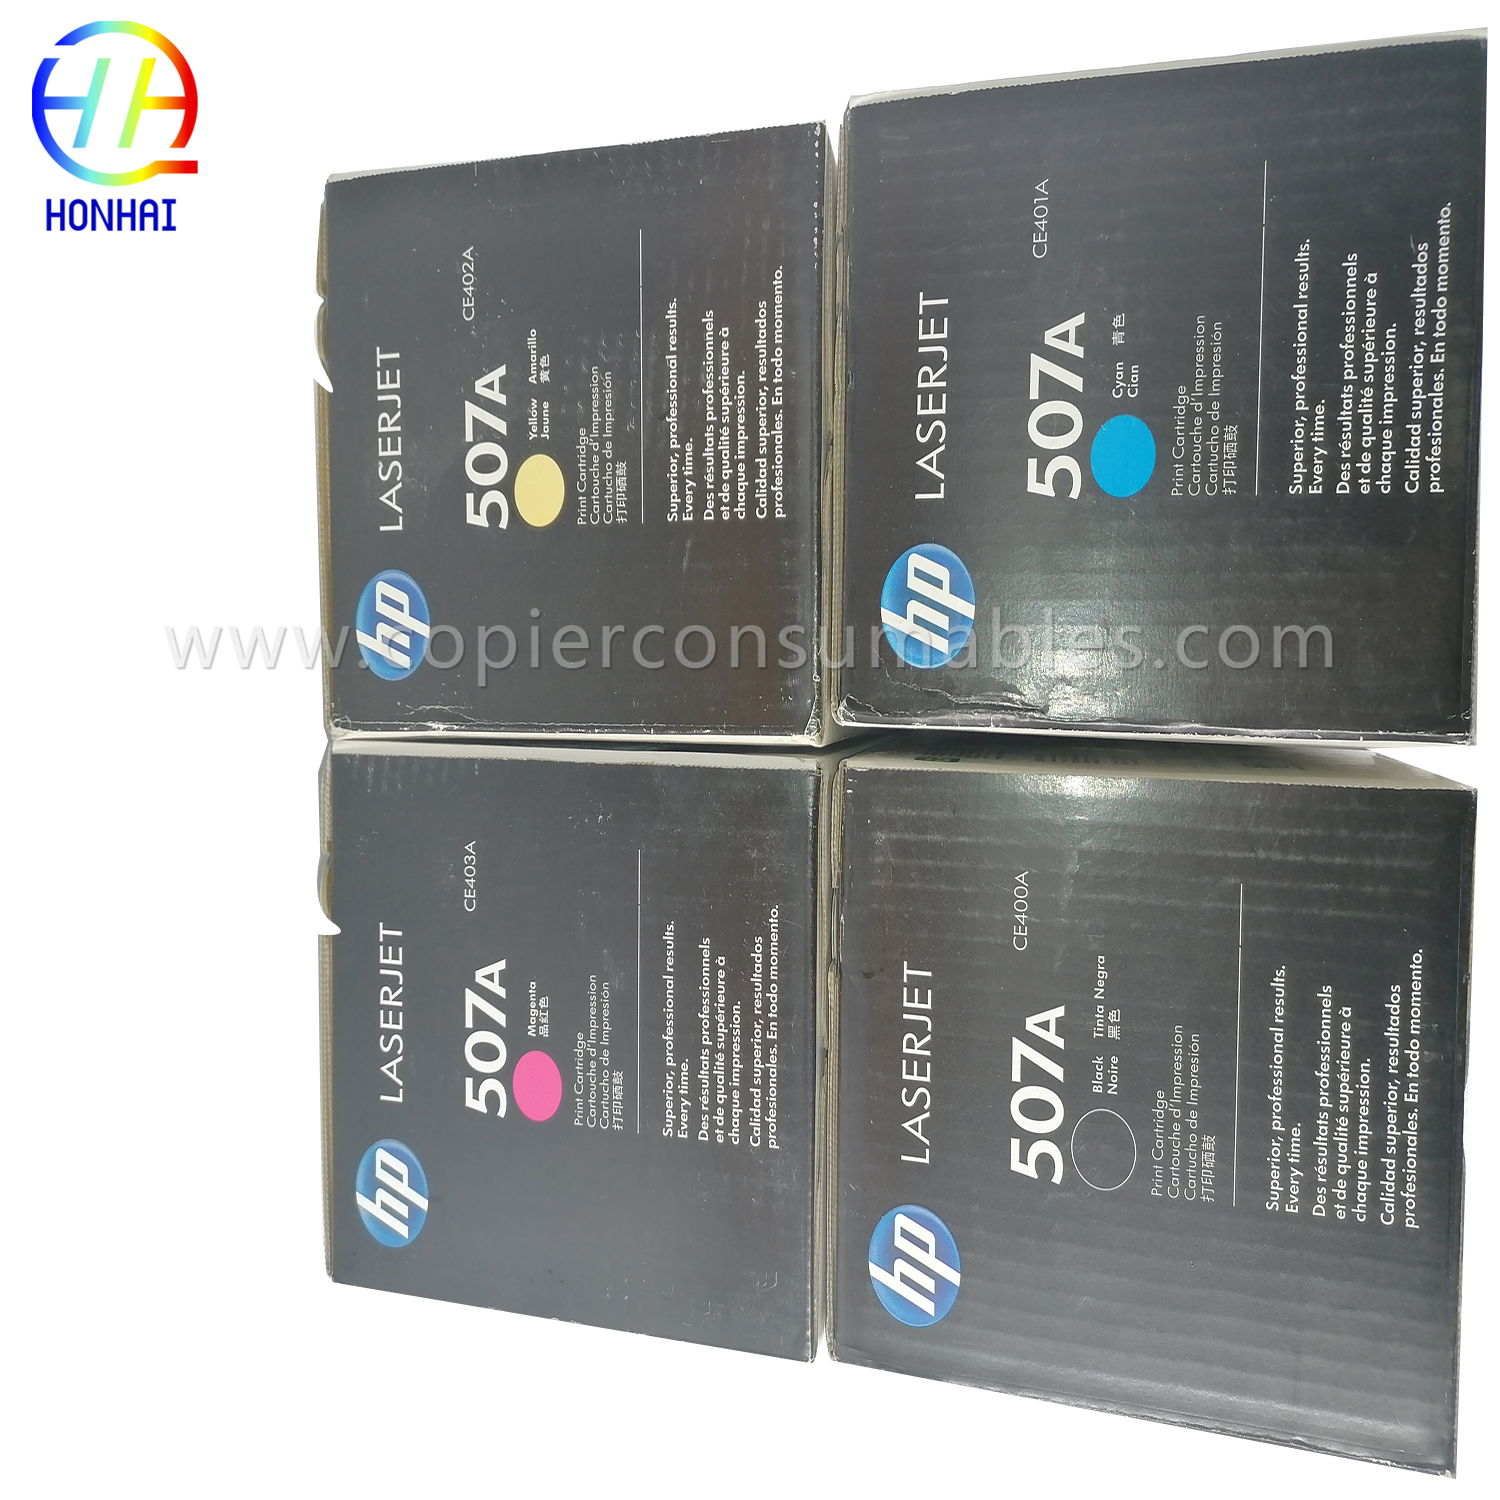 Касета со мастило (комплет) за HP HP 507A CE400ACE401ACE402ACE403A M575dn,M575f,M575c,M570dn,M570dw,M551dn,M551n,M551xh(2) 拷贝